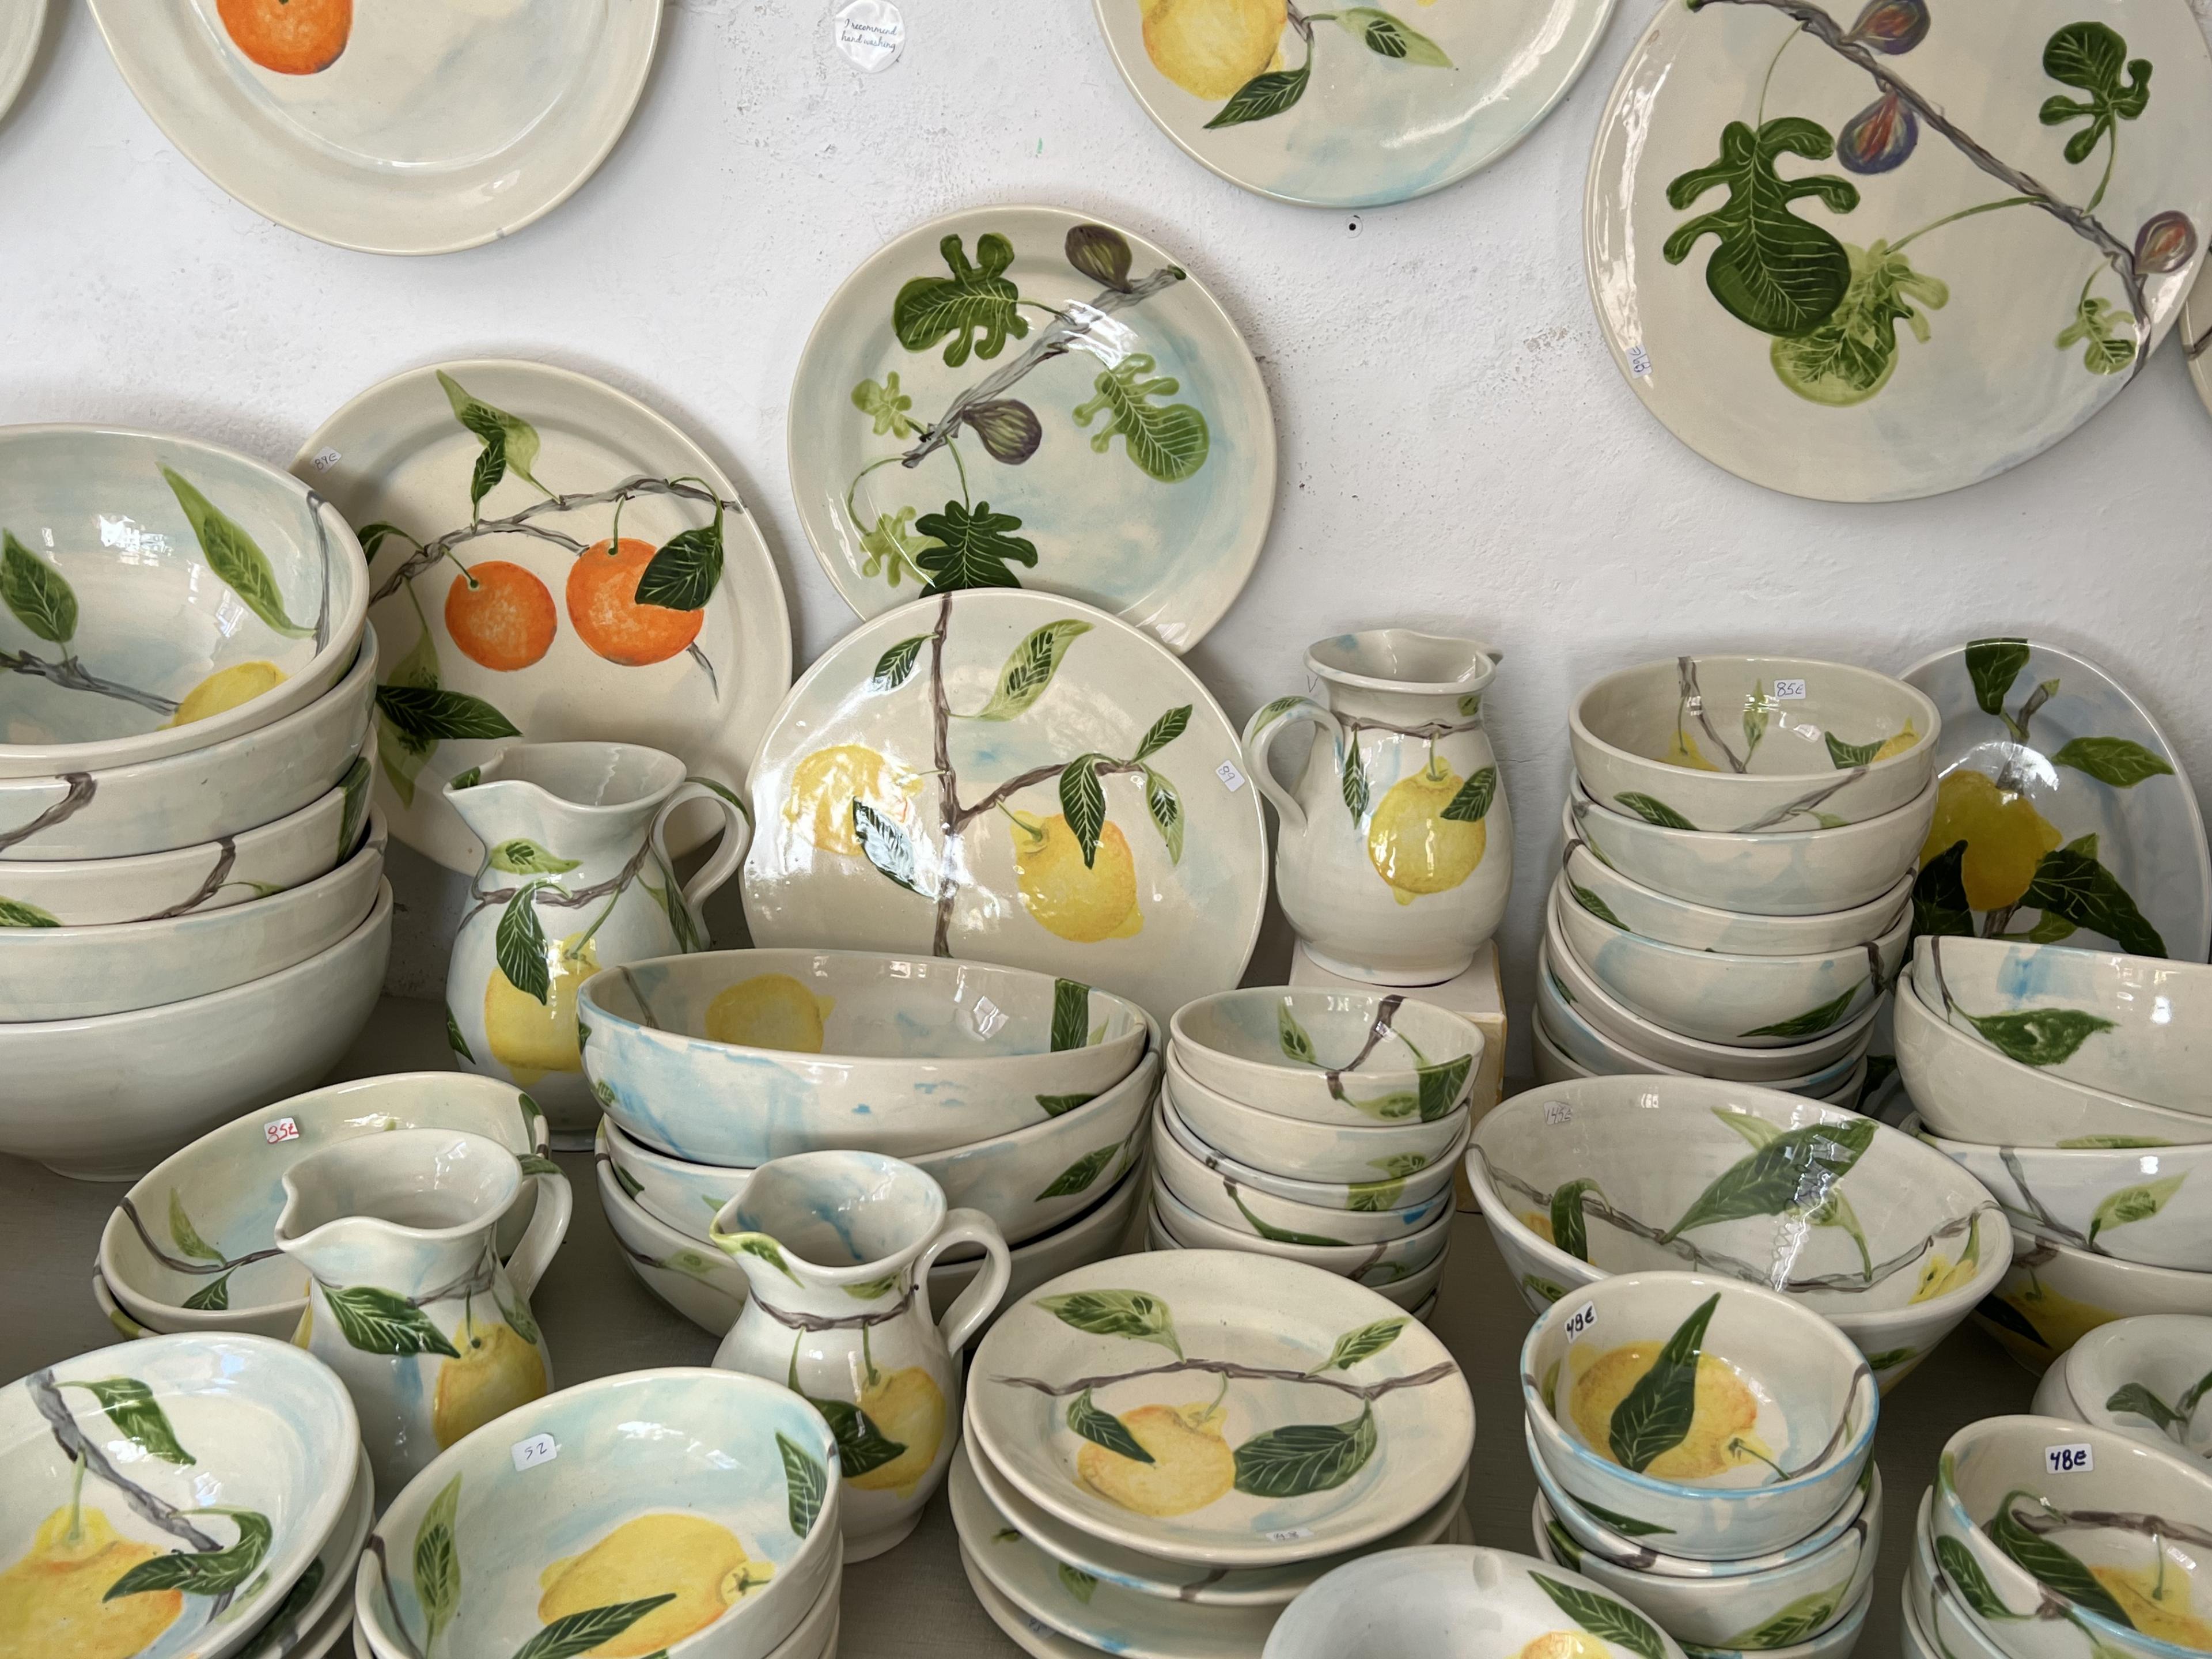 Ceramic bowls, plates and pitchers painted with lemons and oranges 